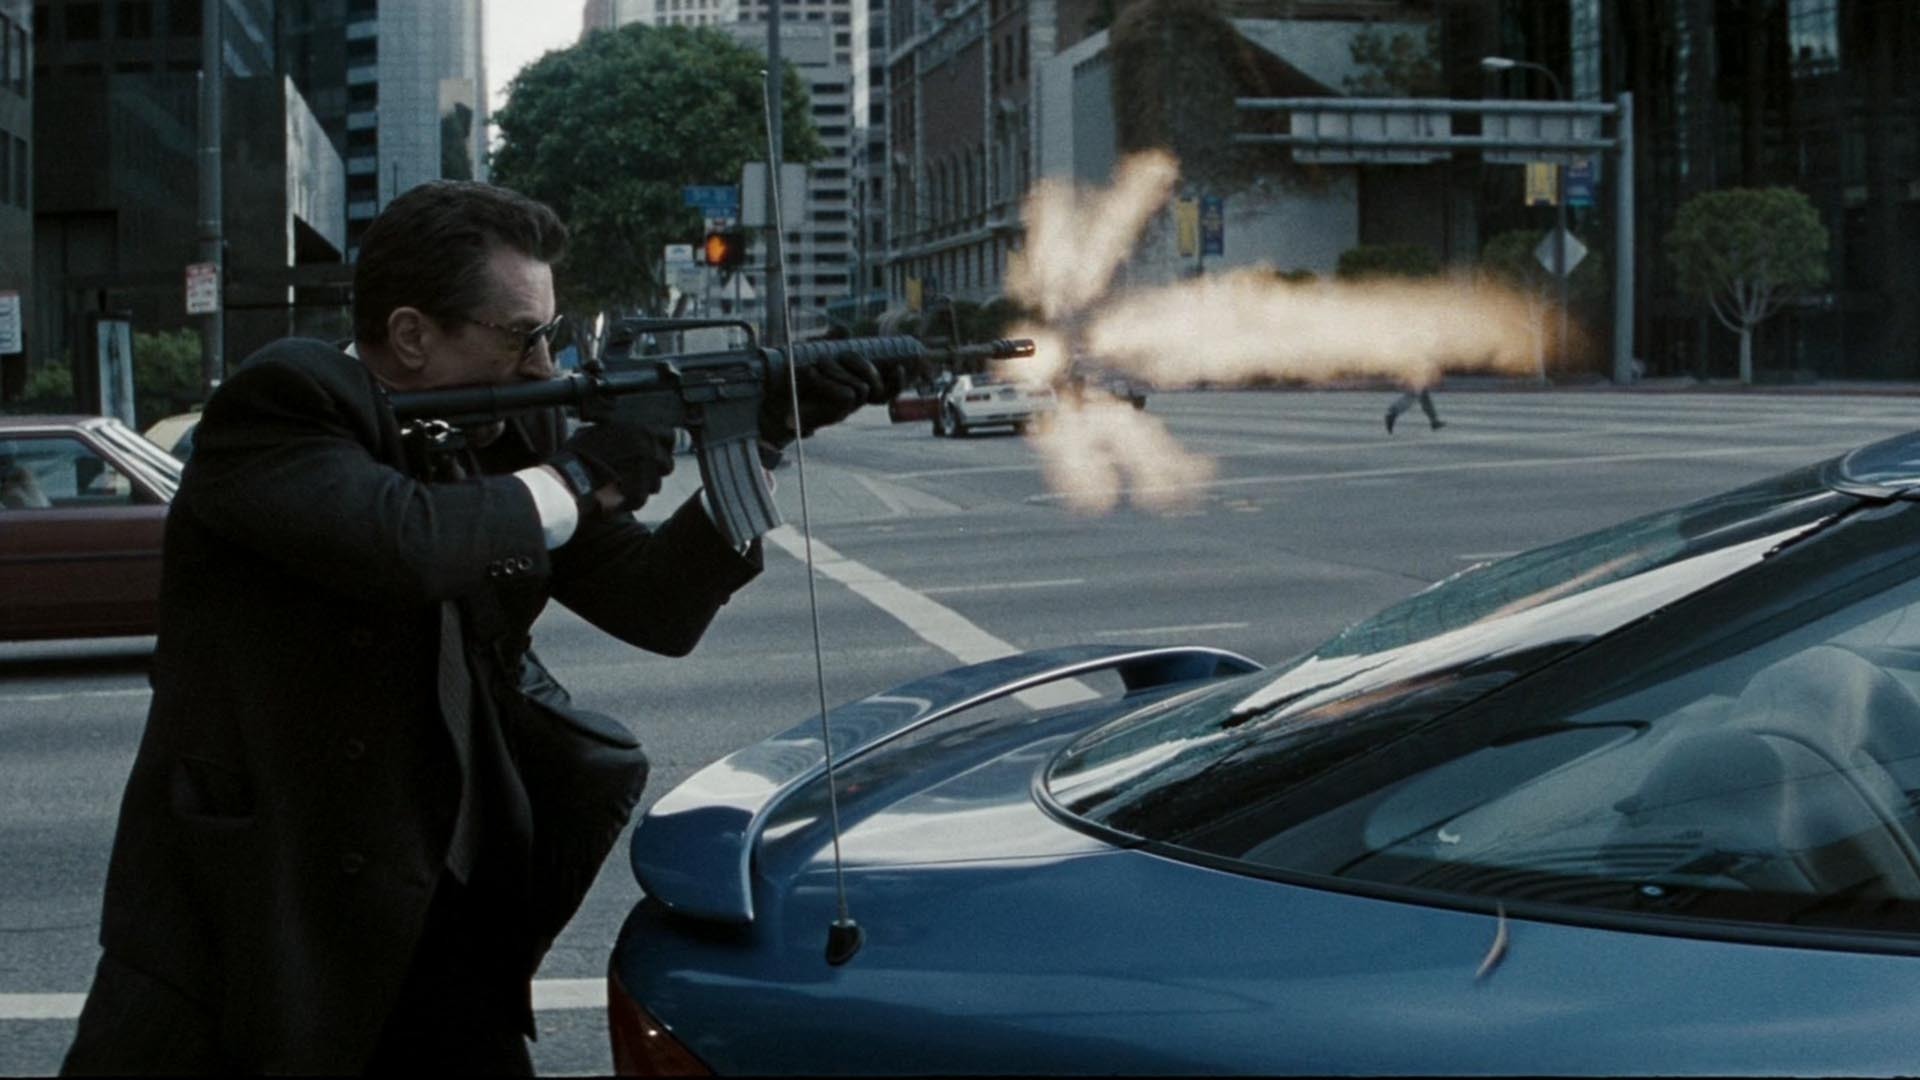 Still from the major scene in the 1995 Michael Mann film "Heat", in which the bank robbers are engaged in a gun battle with police